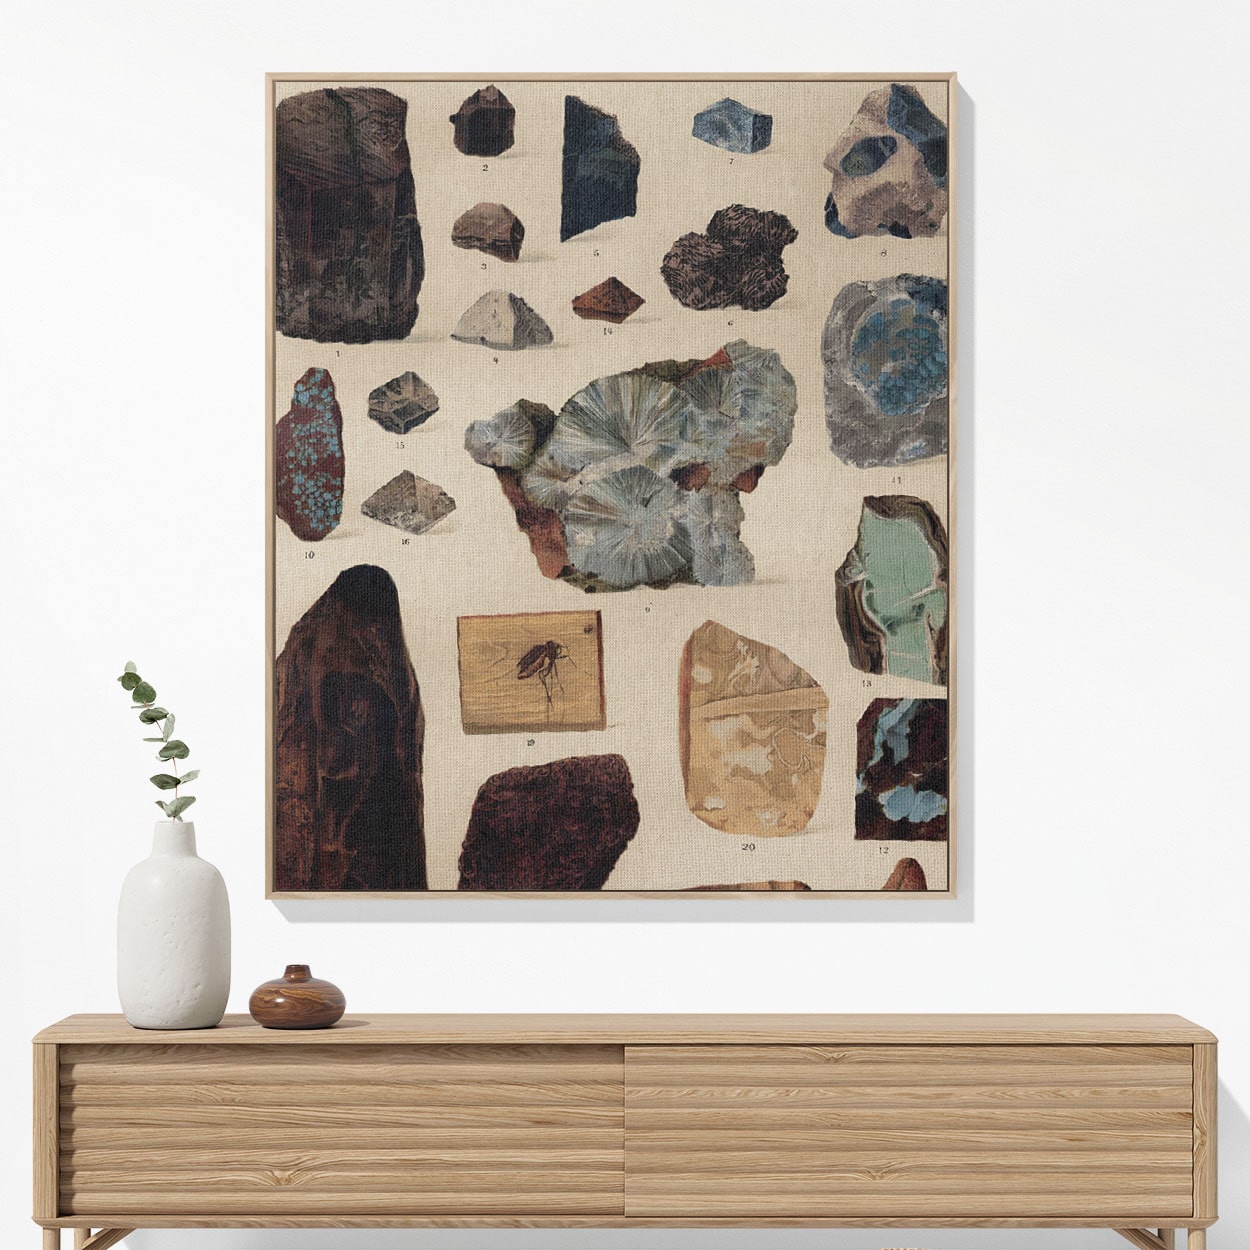 Unique Gemstone Woven Blanket Woven Blanket Hanging on a Wall as Framed Wall Art